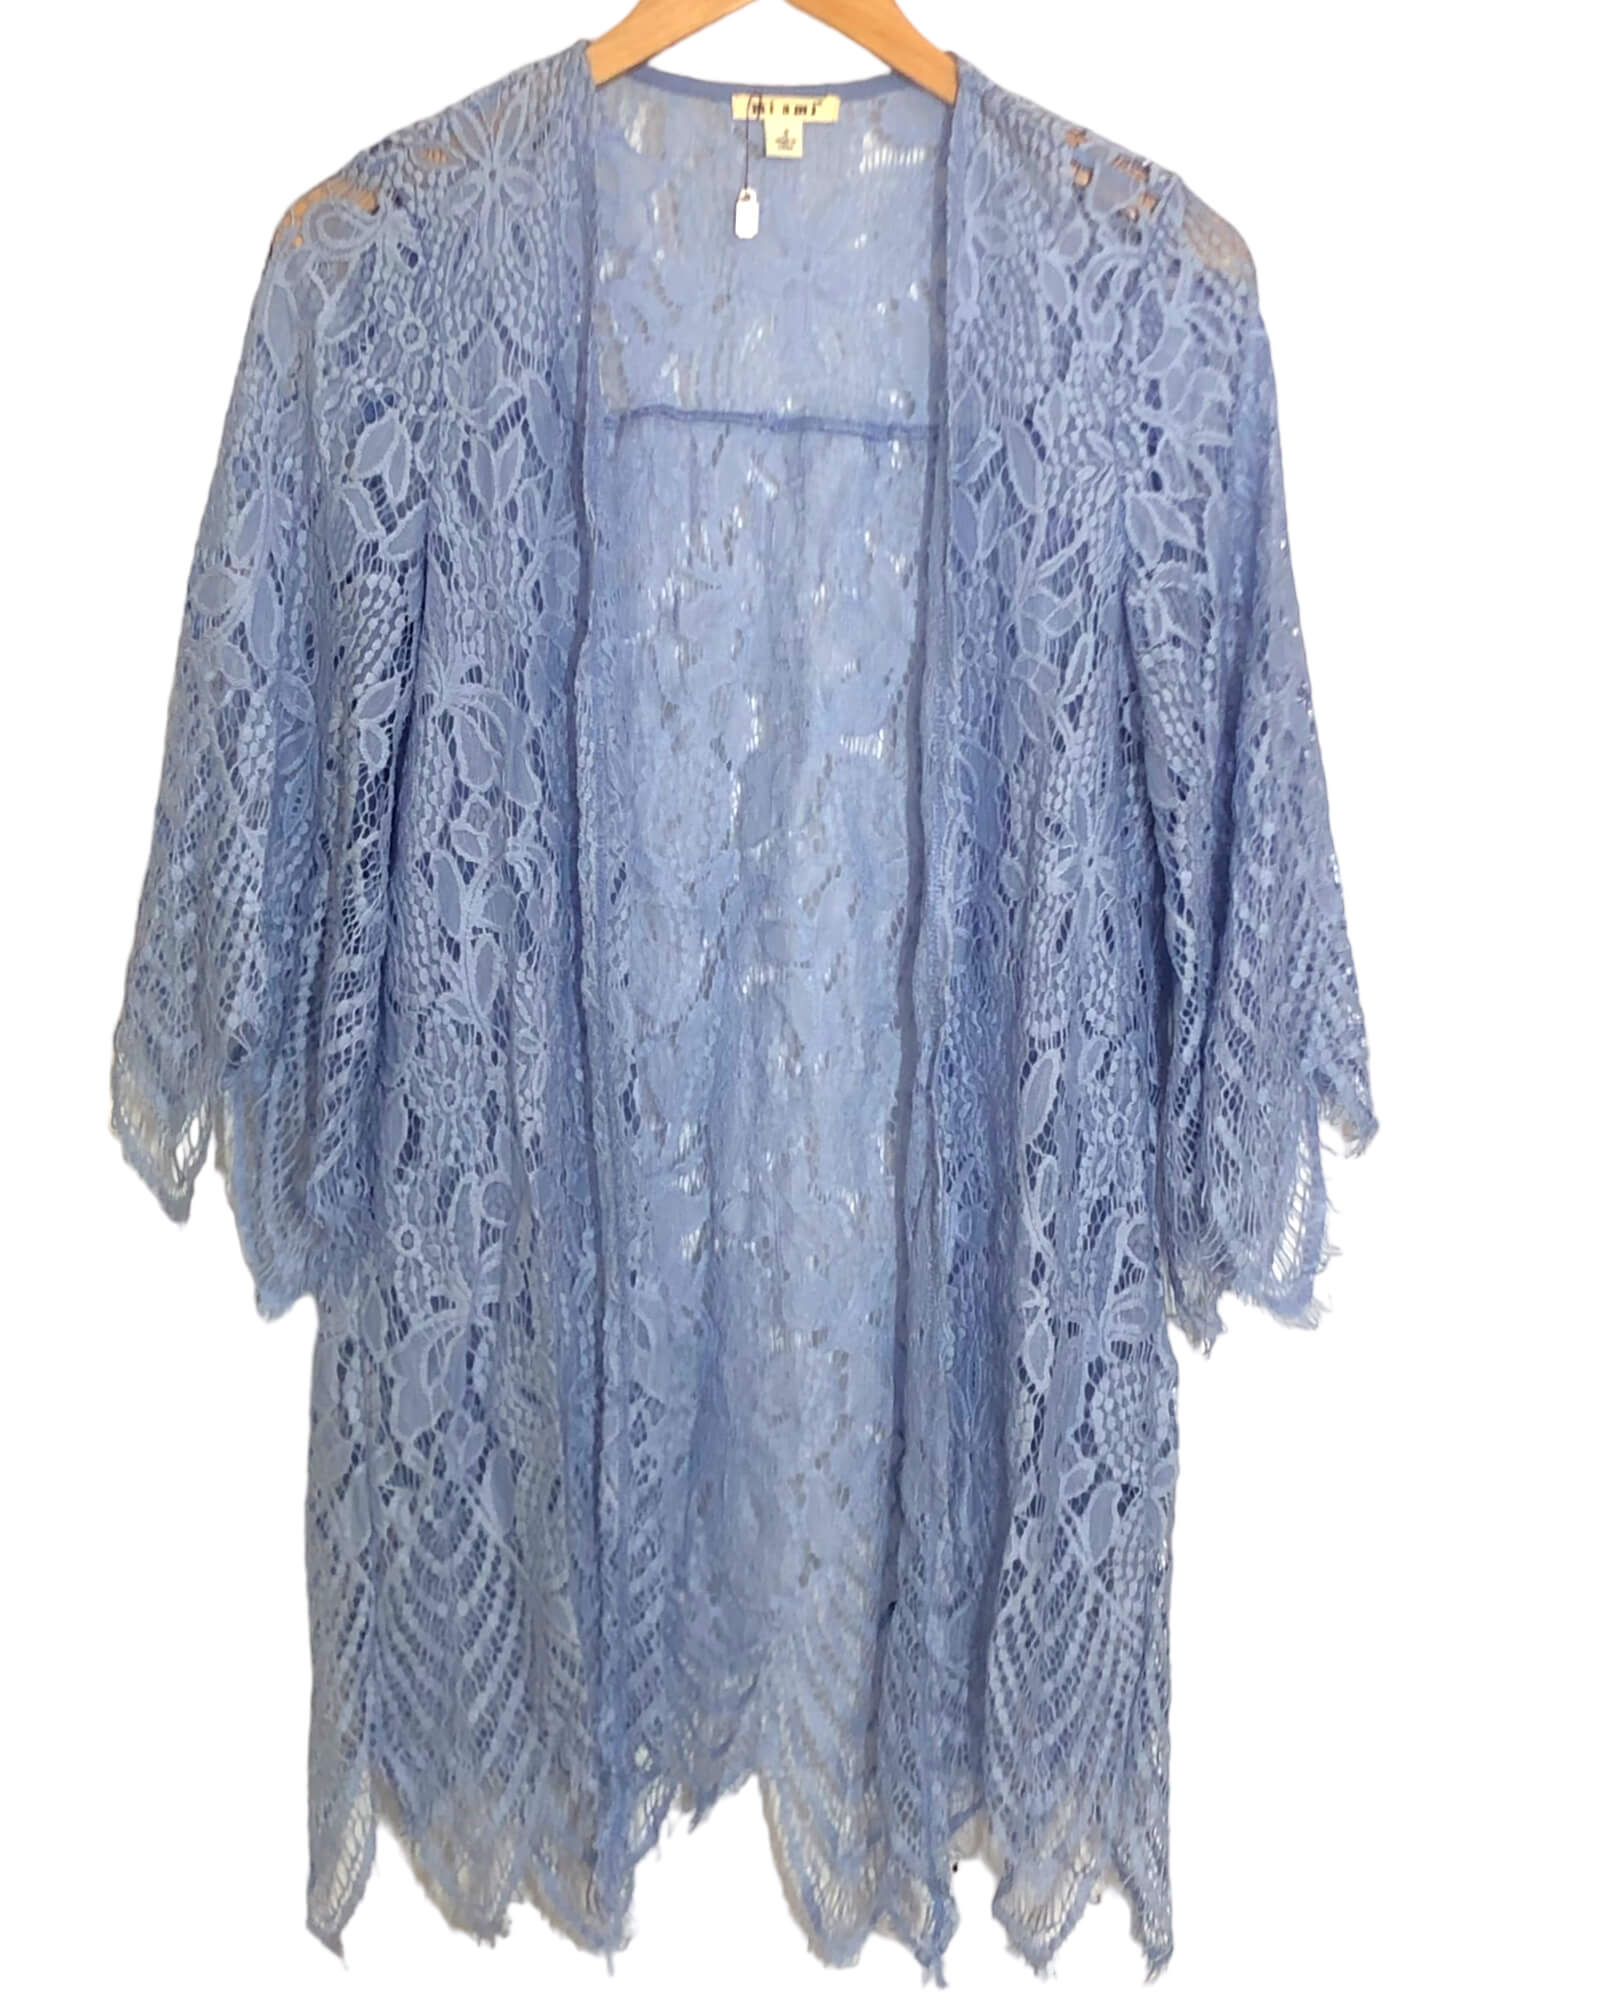 Cool Summer FRANCHESCAS MIAMI blue lace open cardigan 